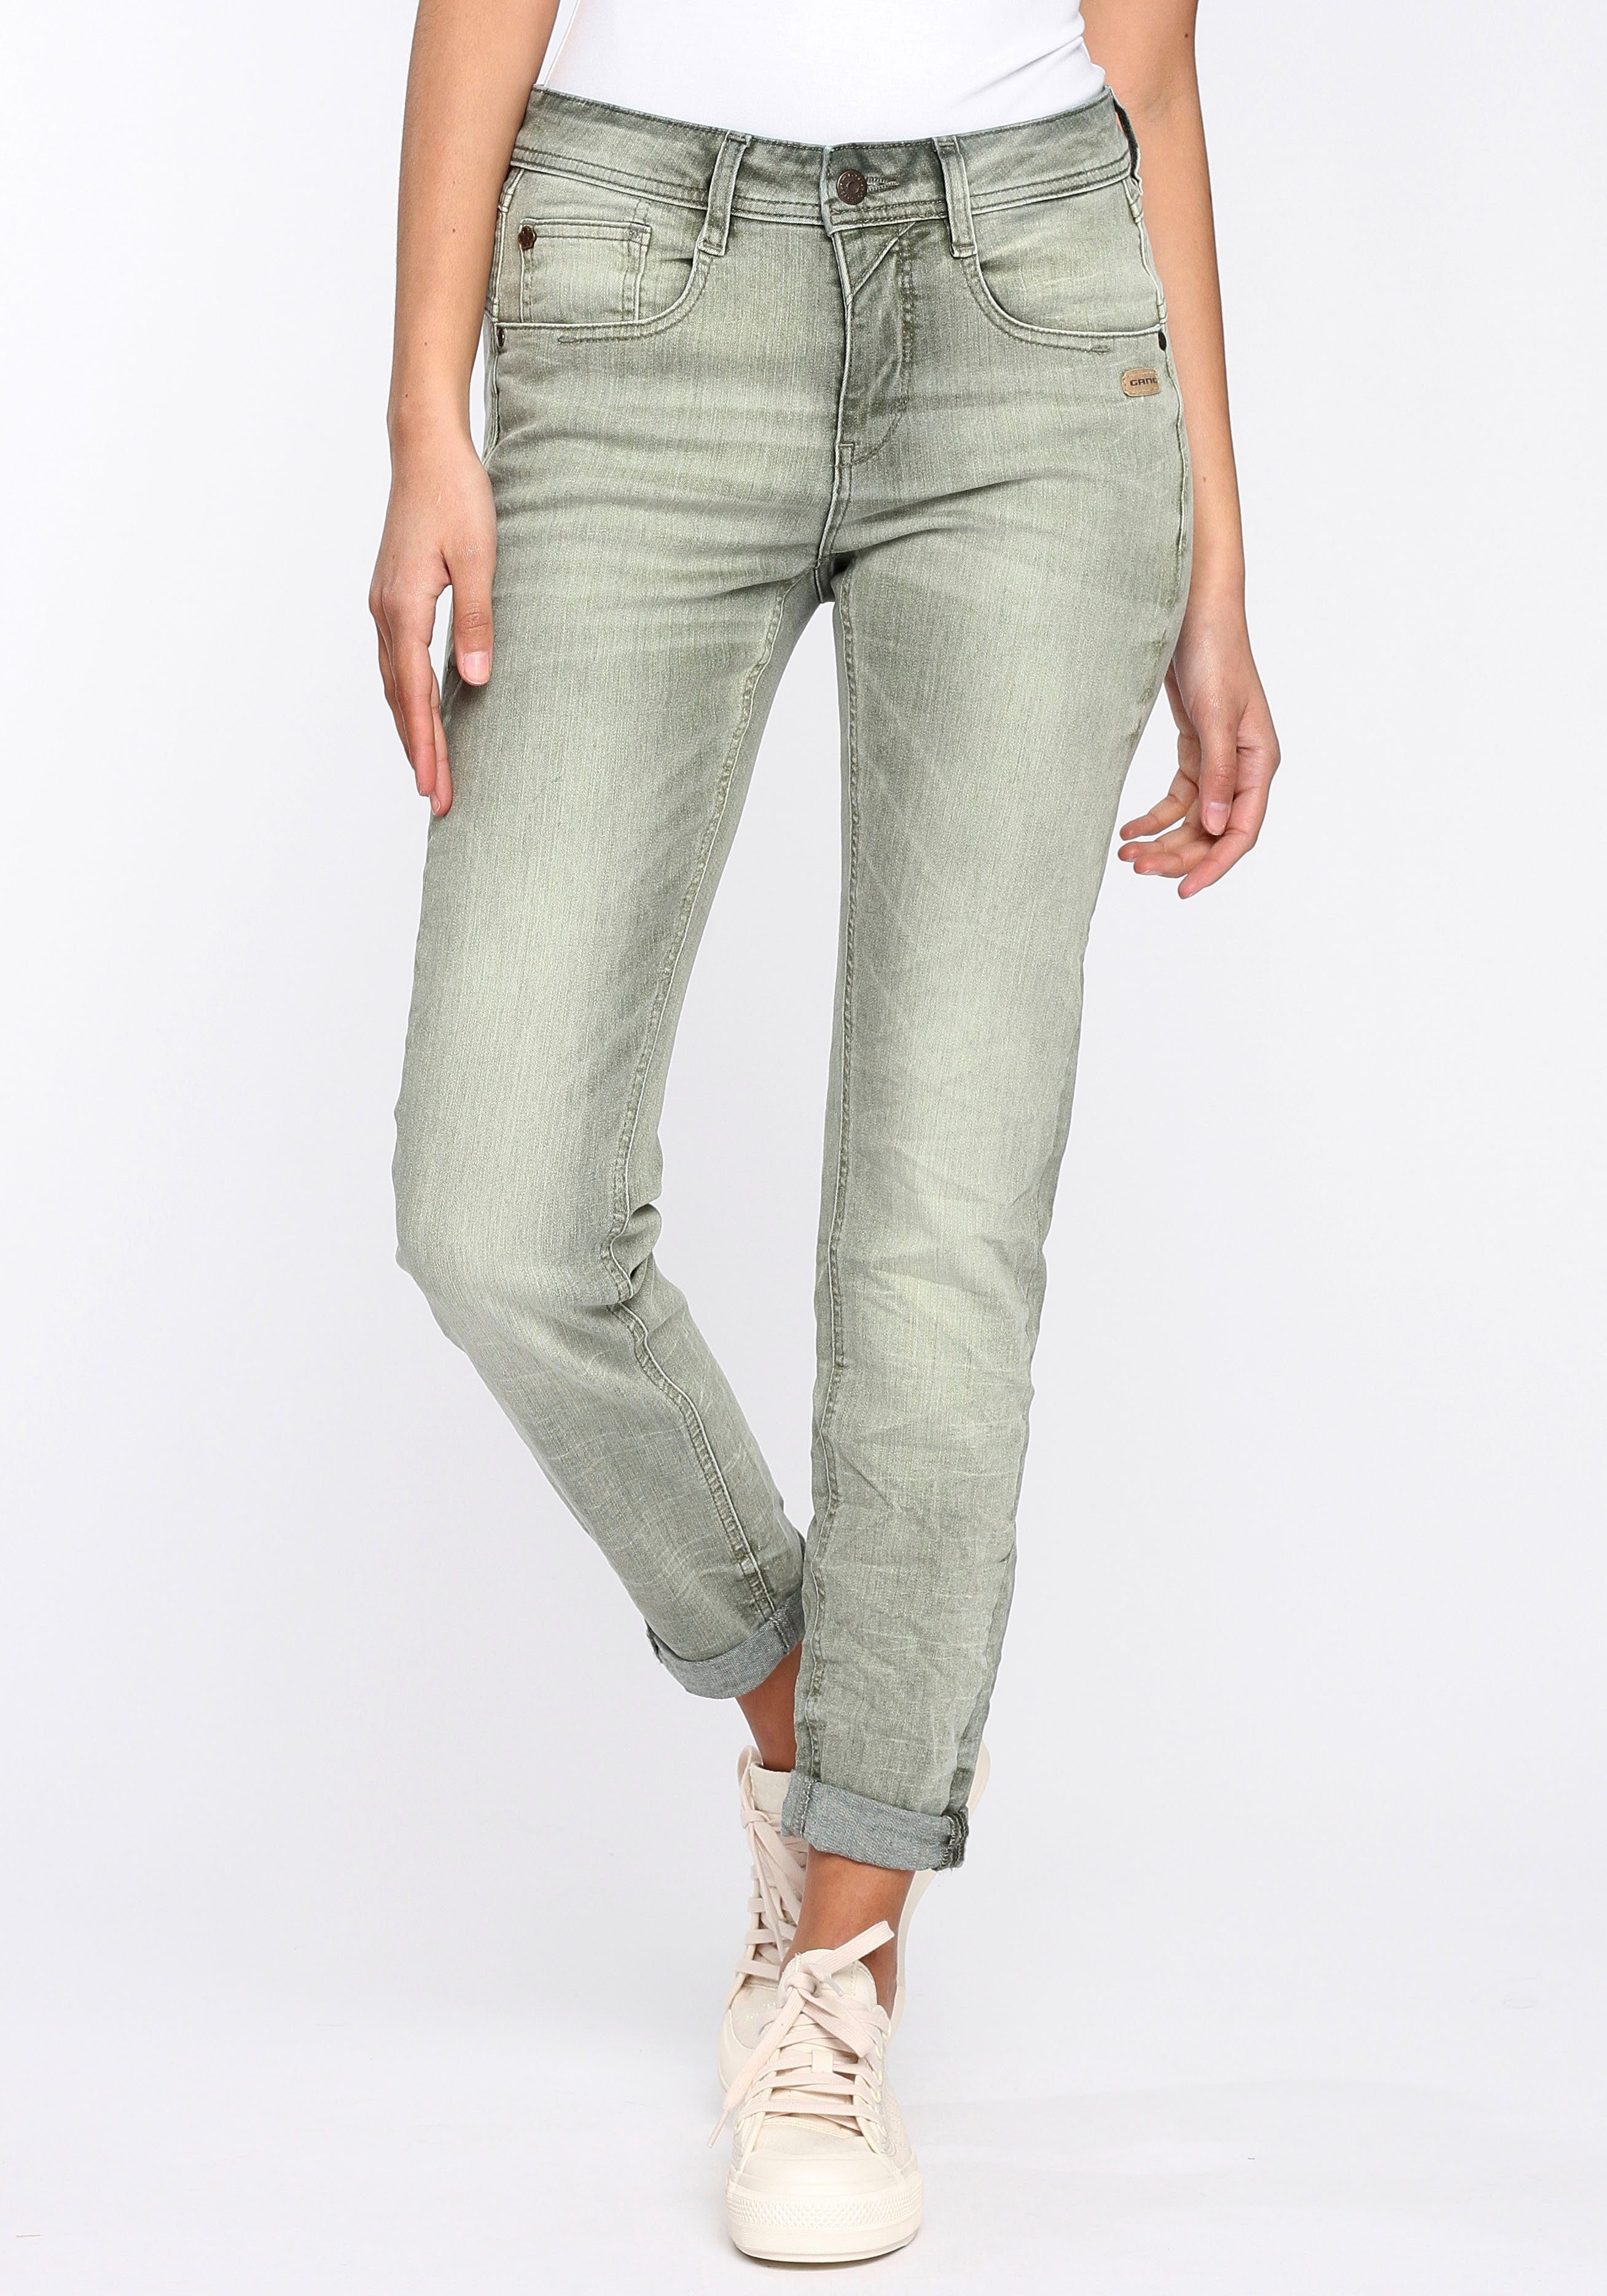 GANG Relax-fit-Jeans 94AMELIE perfekter Sitz down (grey washed durch used) Elasthan-Anteil